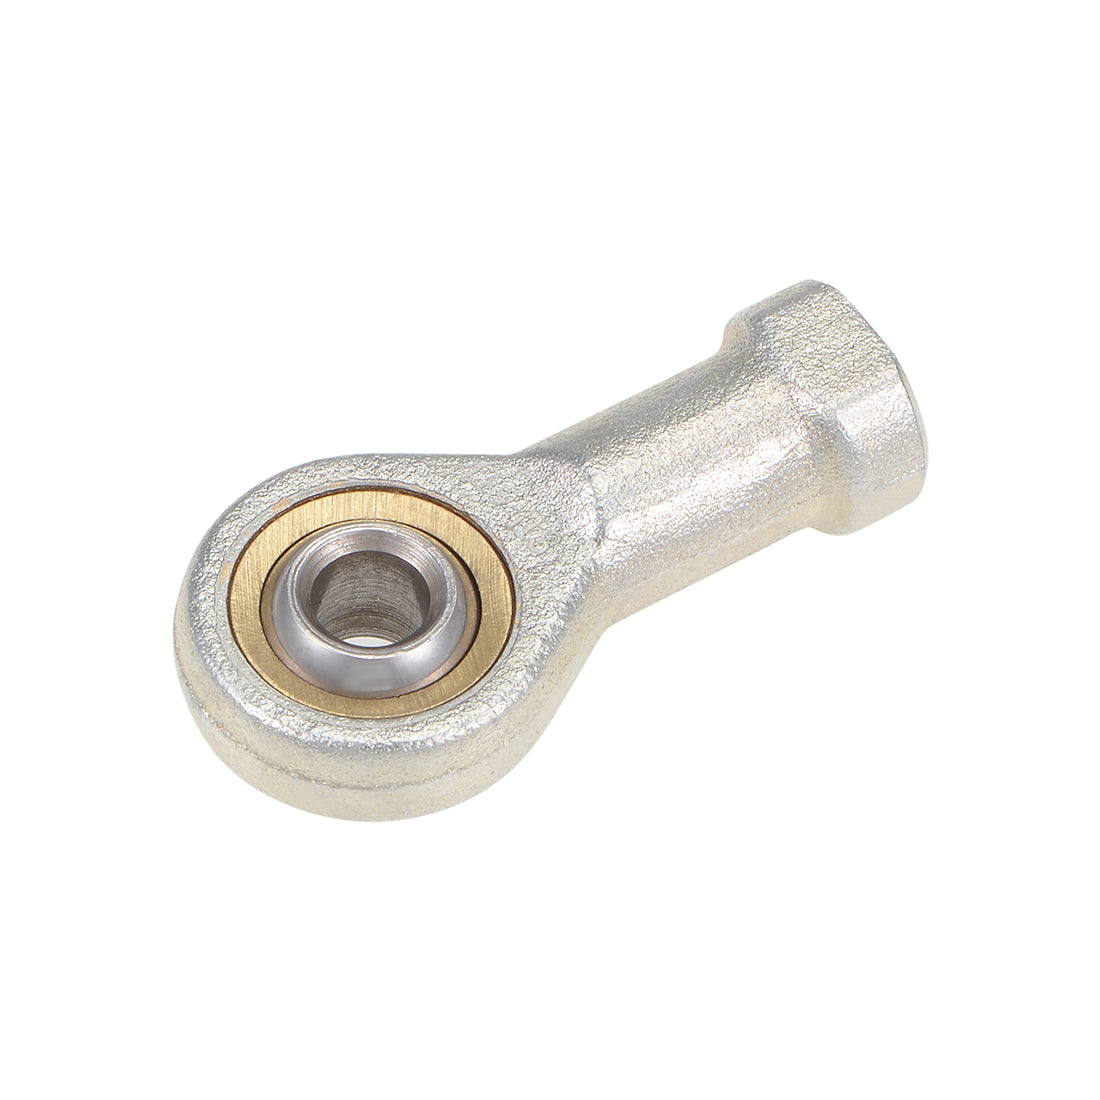 uxcell Uxcell 6mm Rod End Bearing M6x1.0mm Rod Ends Ball Joint Female Left Hand Thread 2pcs